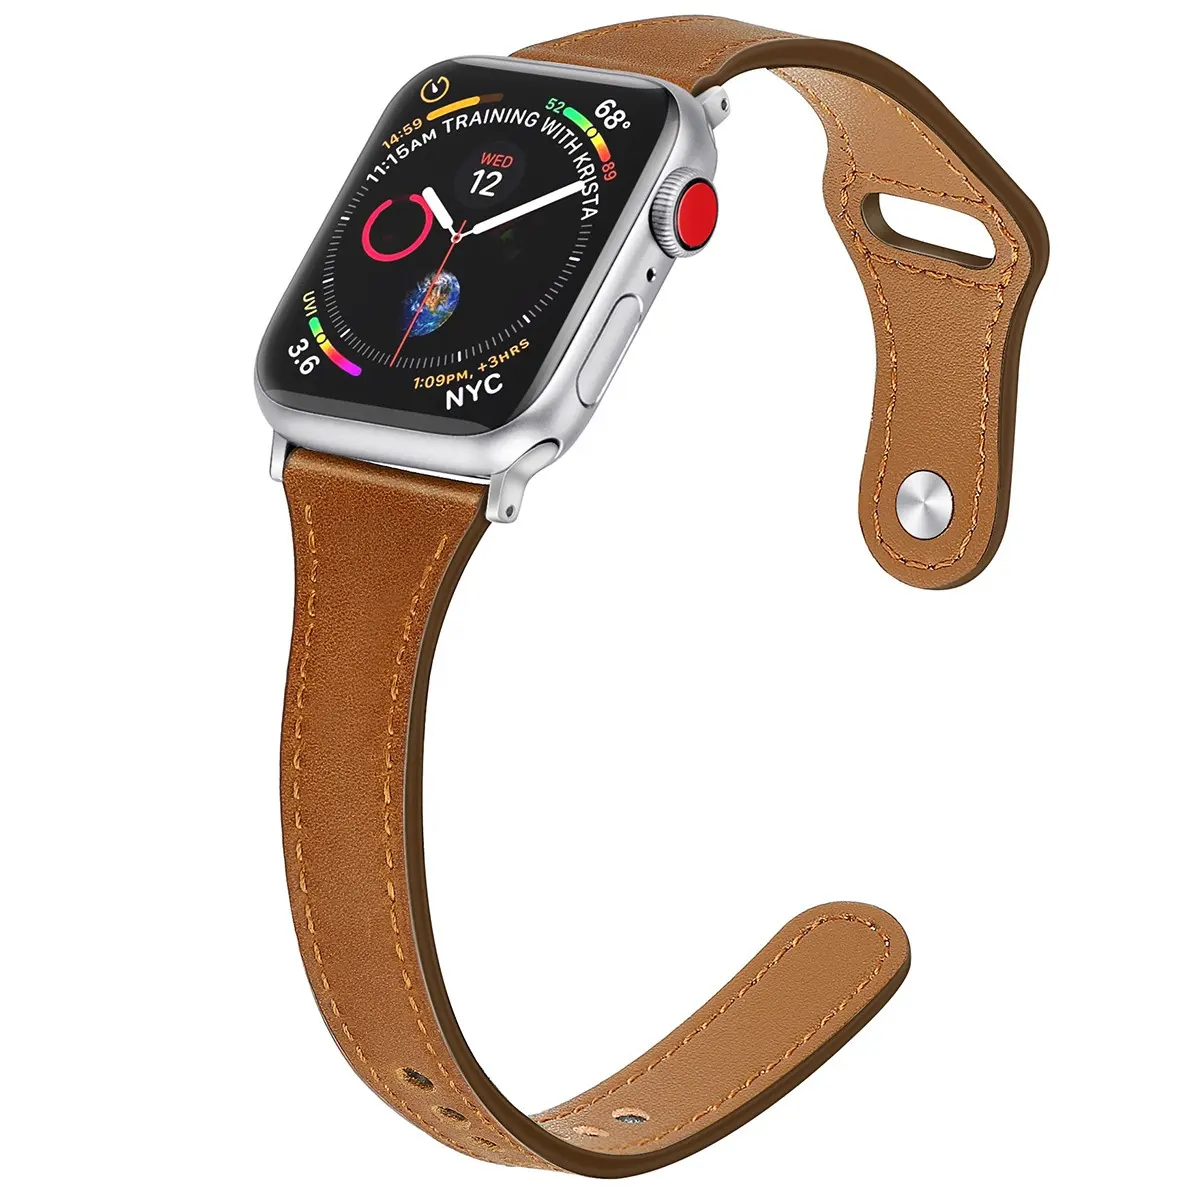 Slim Genuine Leather Wrist Watch Band For Apple Watch Series 5 4 Straps